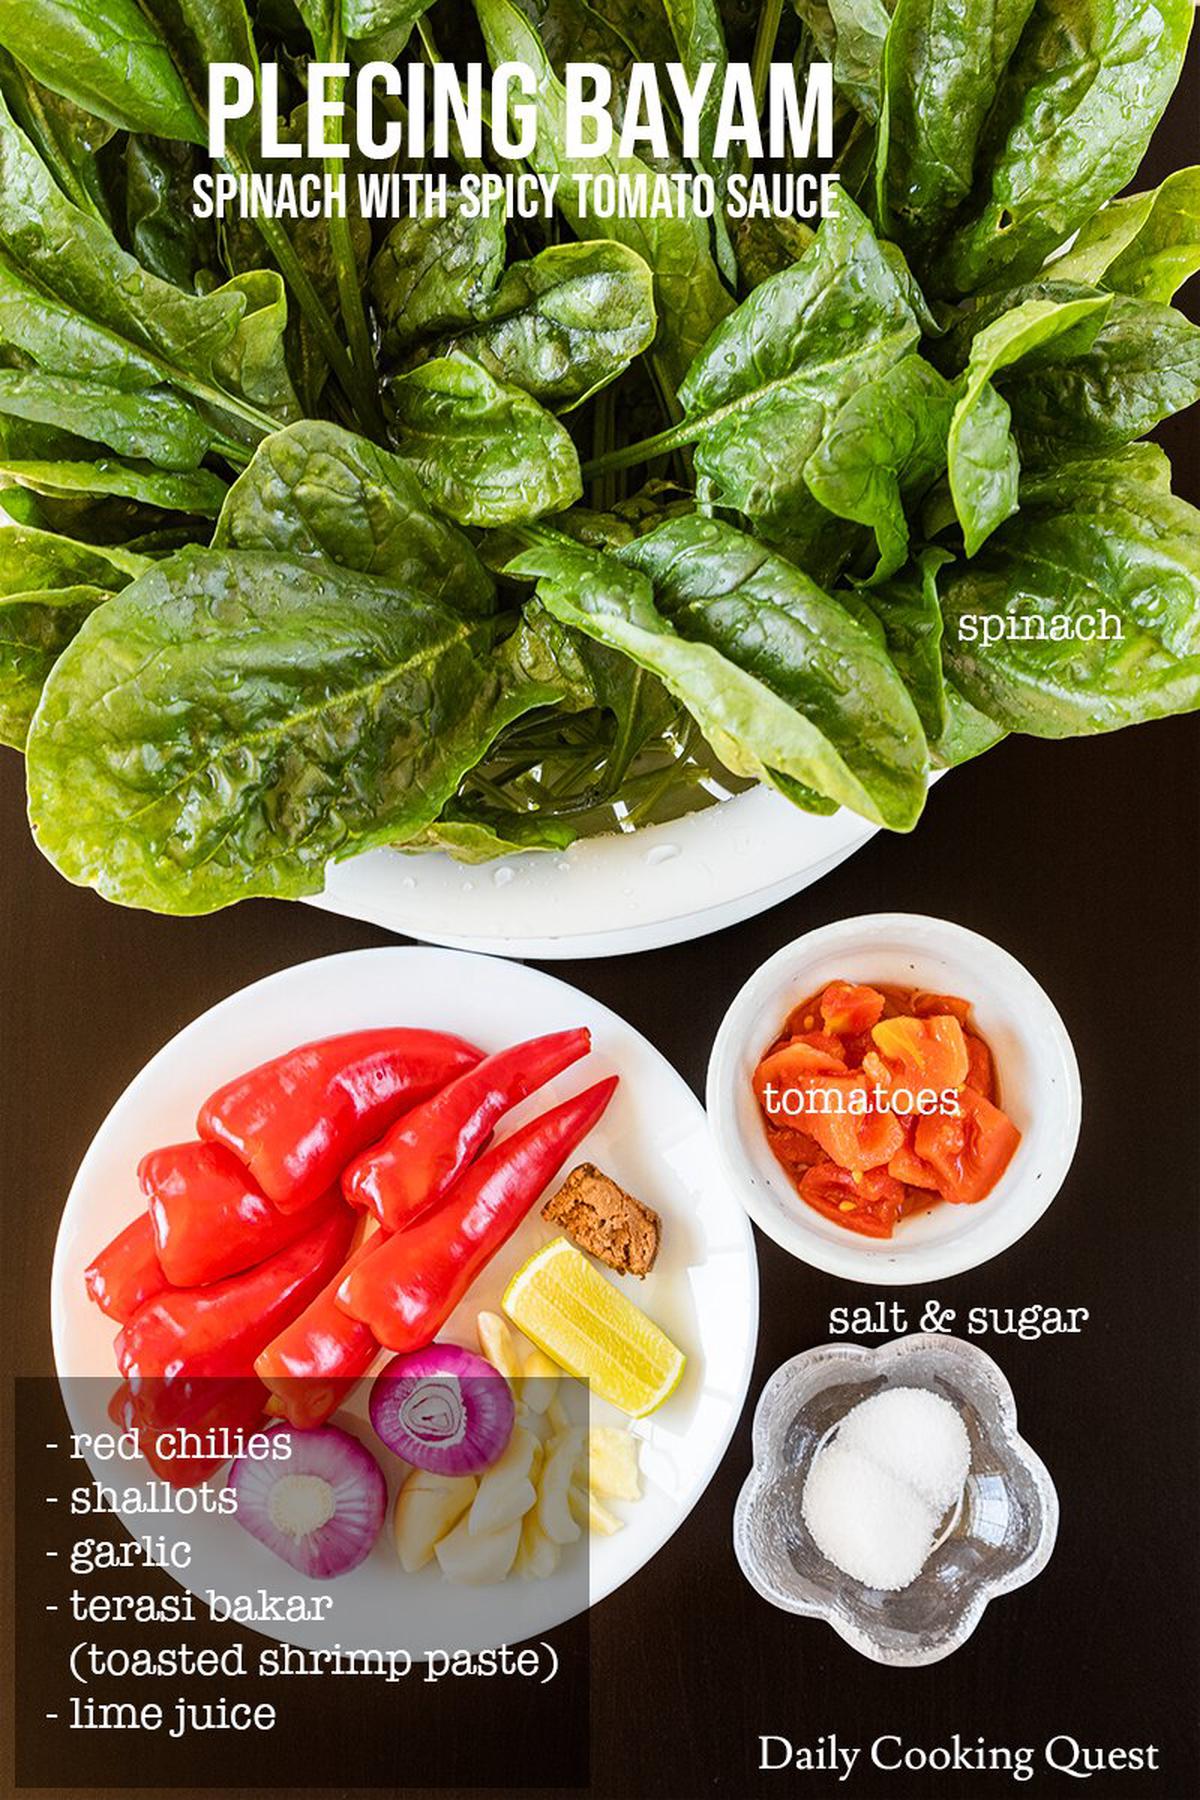 Ingredients to prepare Indonesian plecing bayam (spinach with spicy tomato sauce).